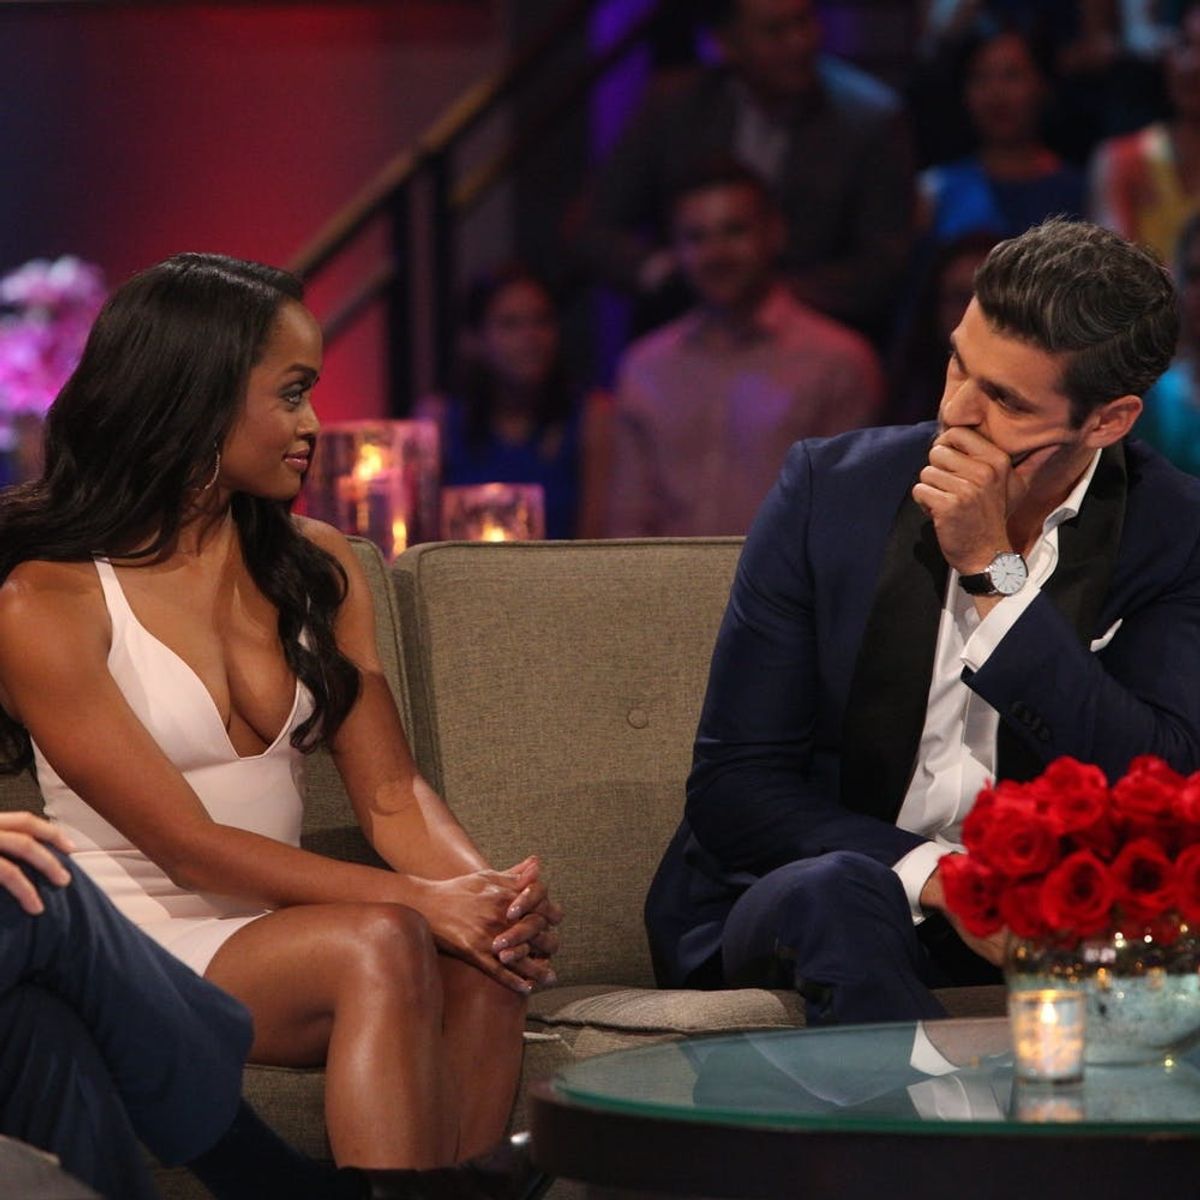 Rachel Lindsay Says It Was “Frustrating” to See Peter Kraus at the Bachelorette Finale